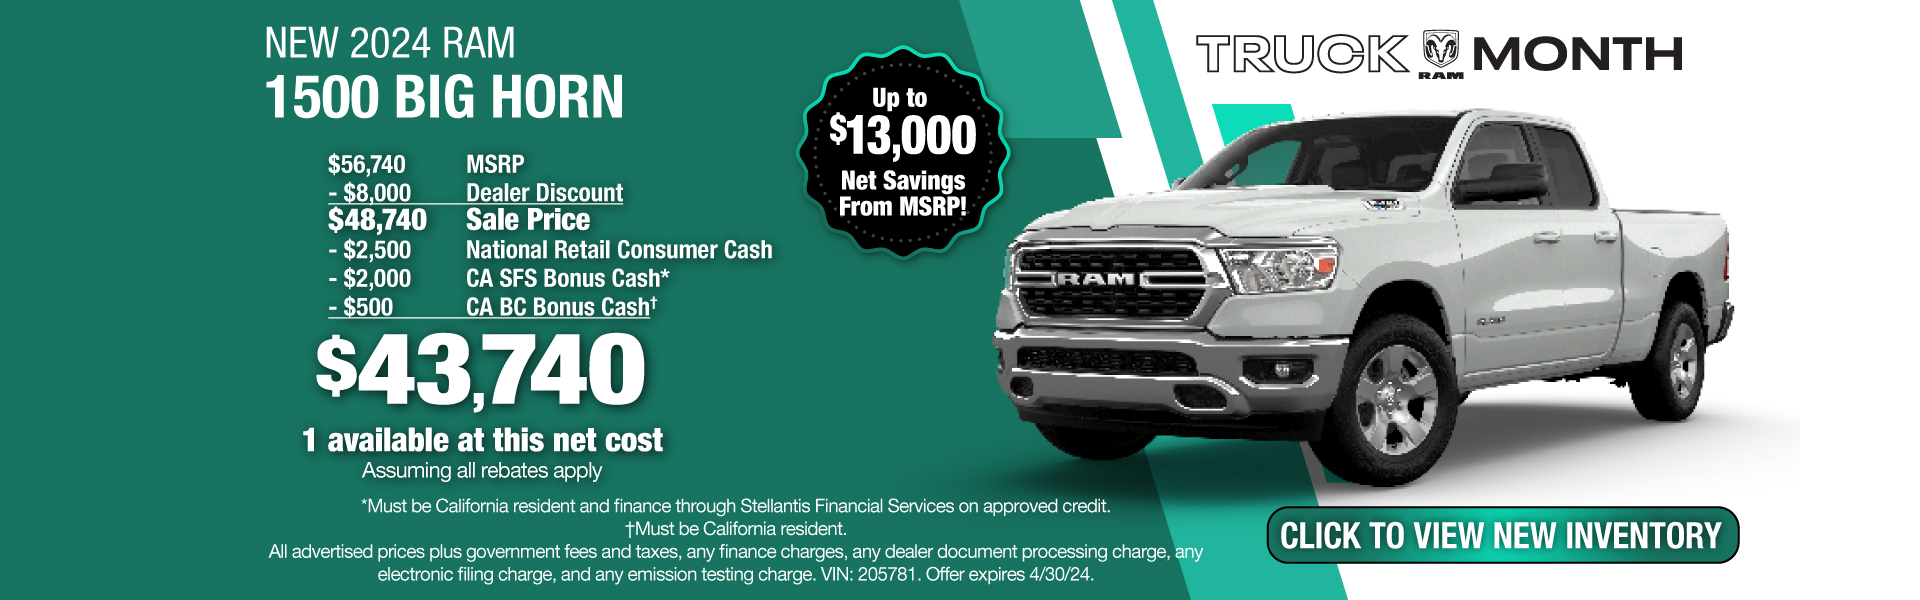 Get a New 2024 RAM 1500 Big Horn for $43,740 Net Cost. Expires 4/30/24.